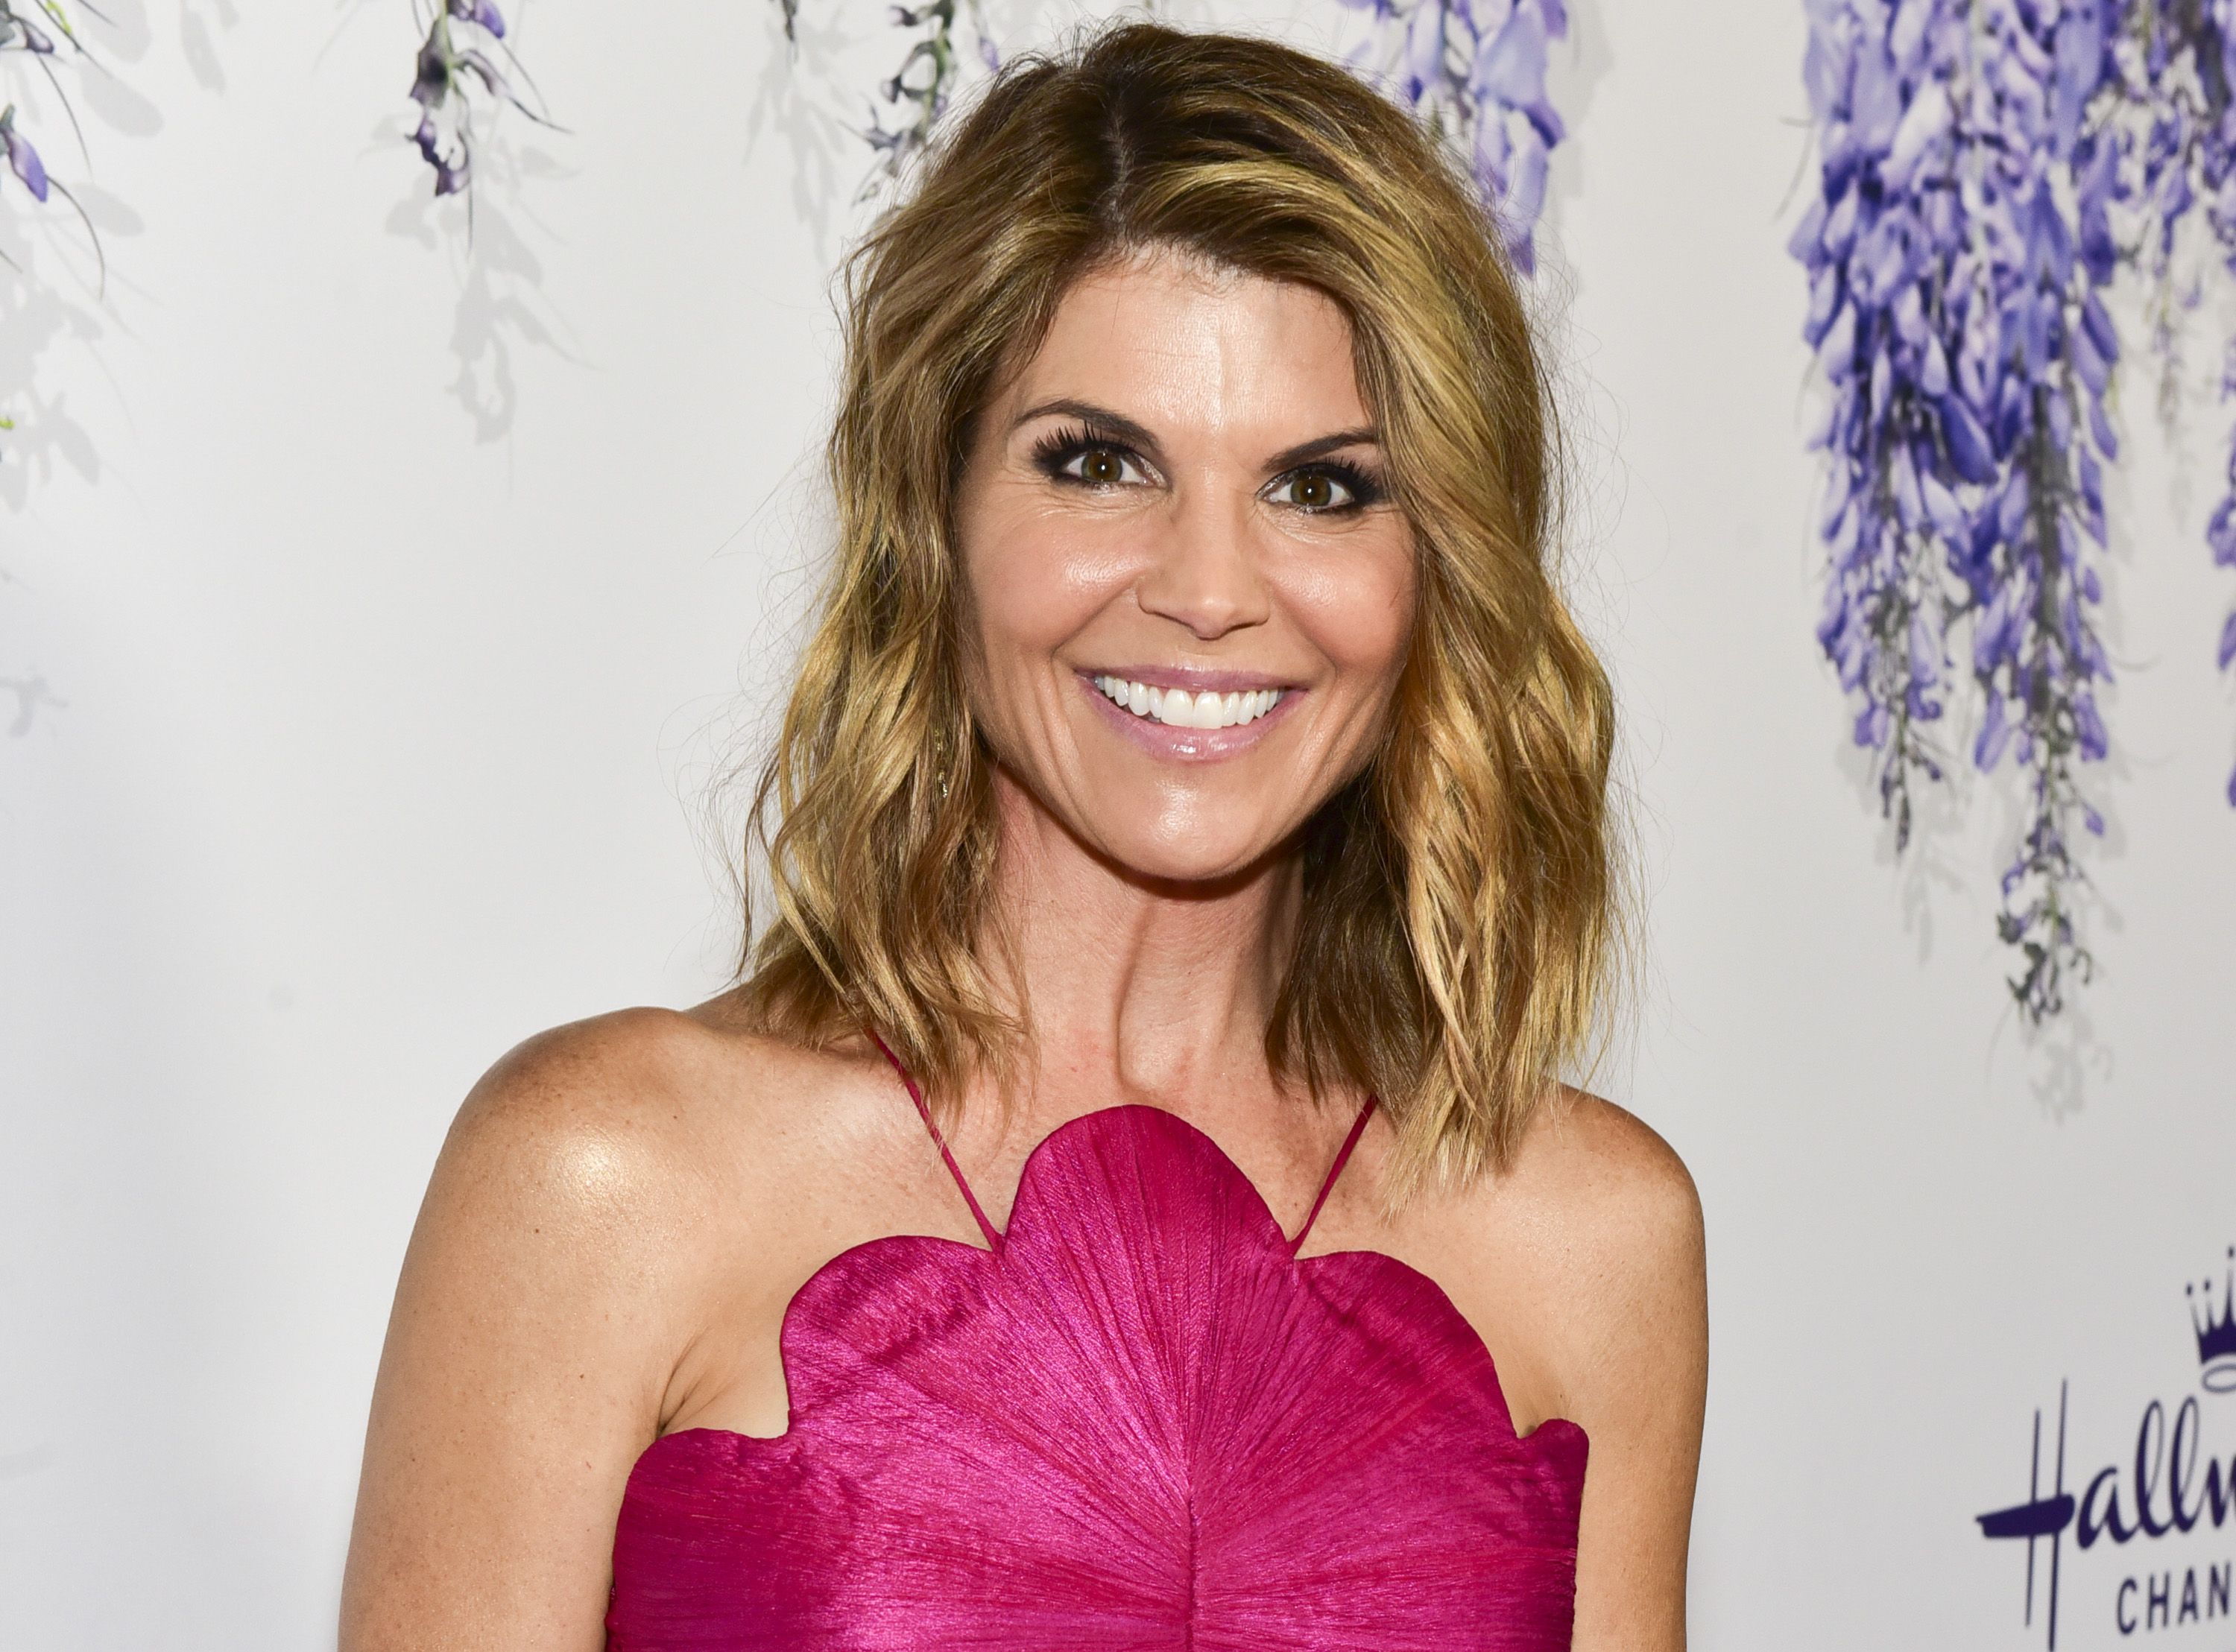 Lori Loughlin at the 2018 Hallmark Channel Summer TCA at a private residence on July 26, 2018 | Photo: Getty Images